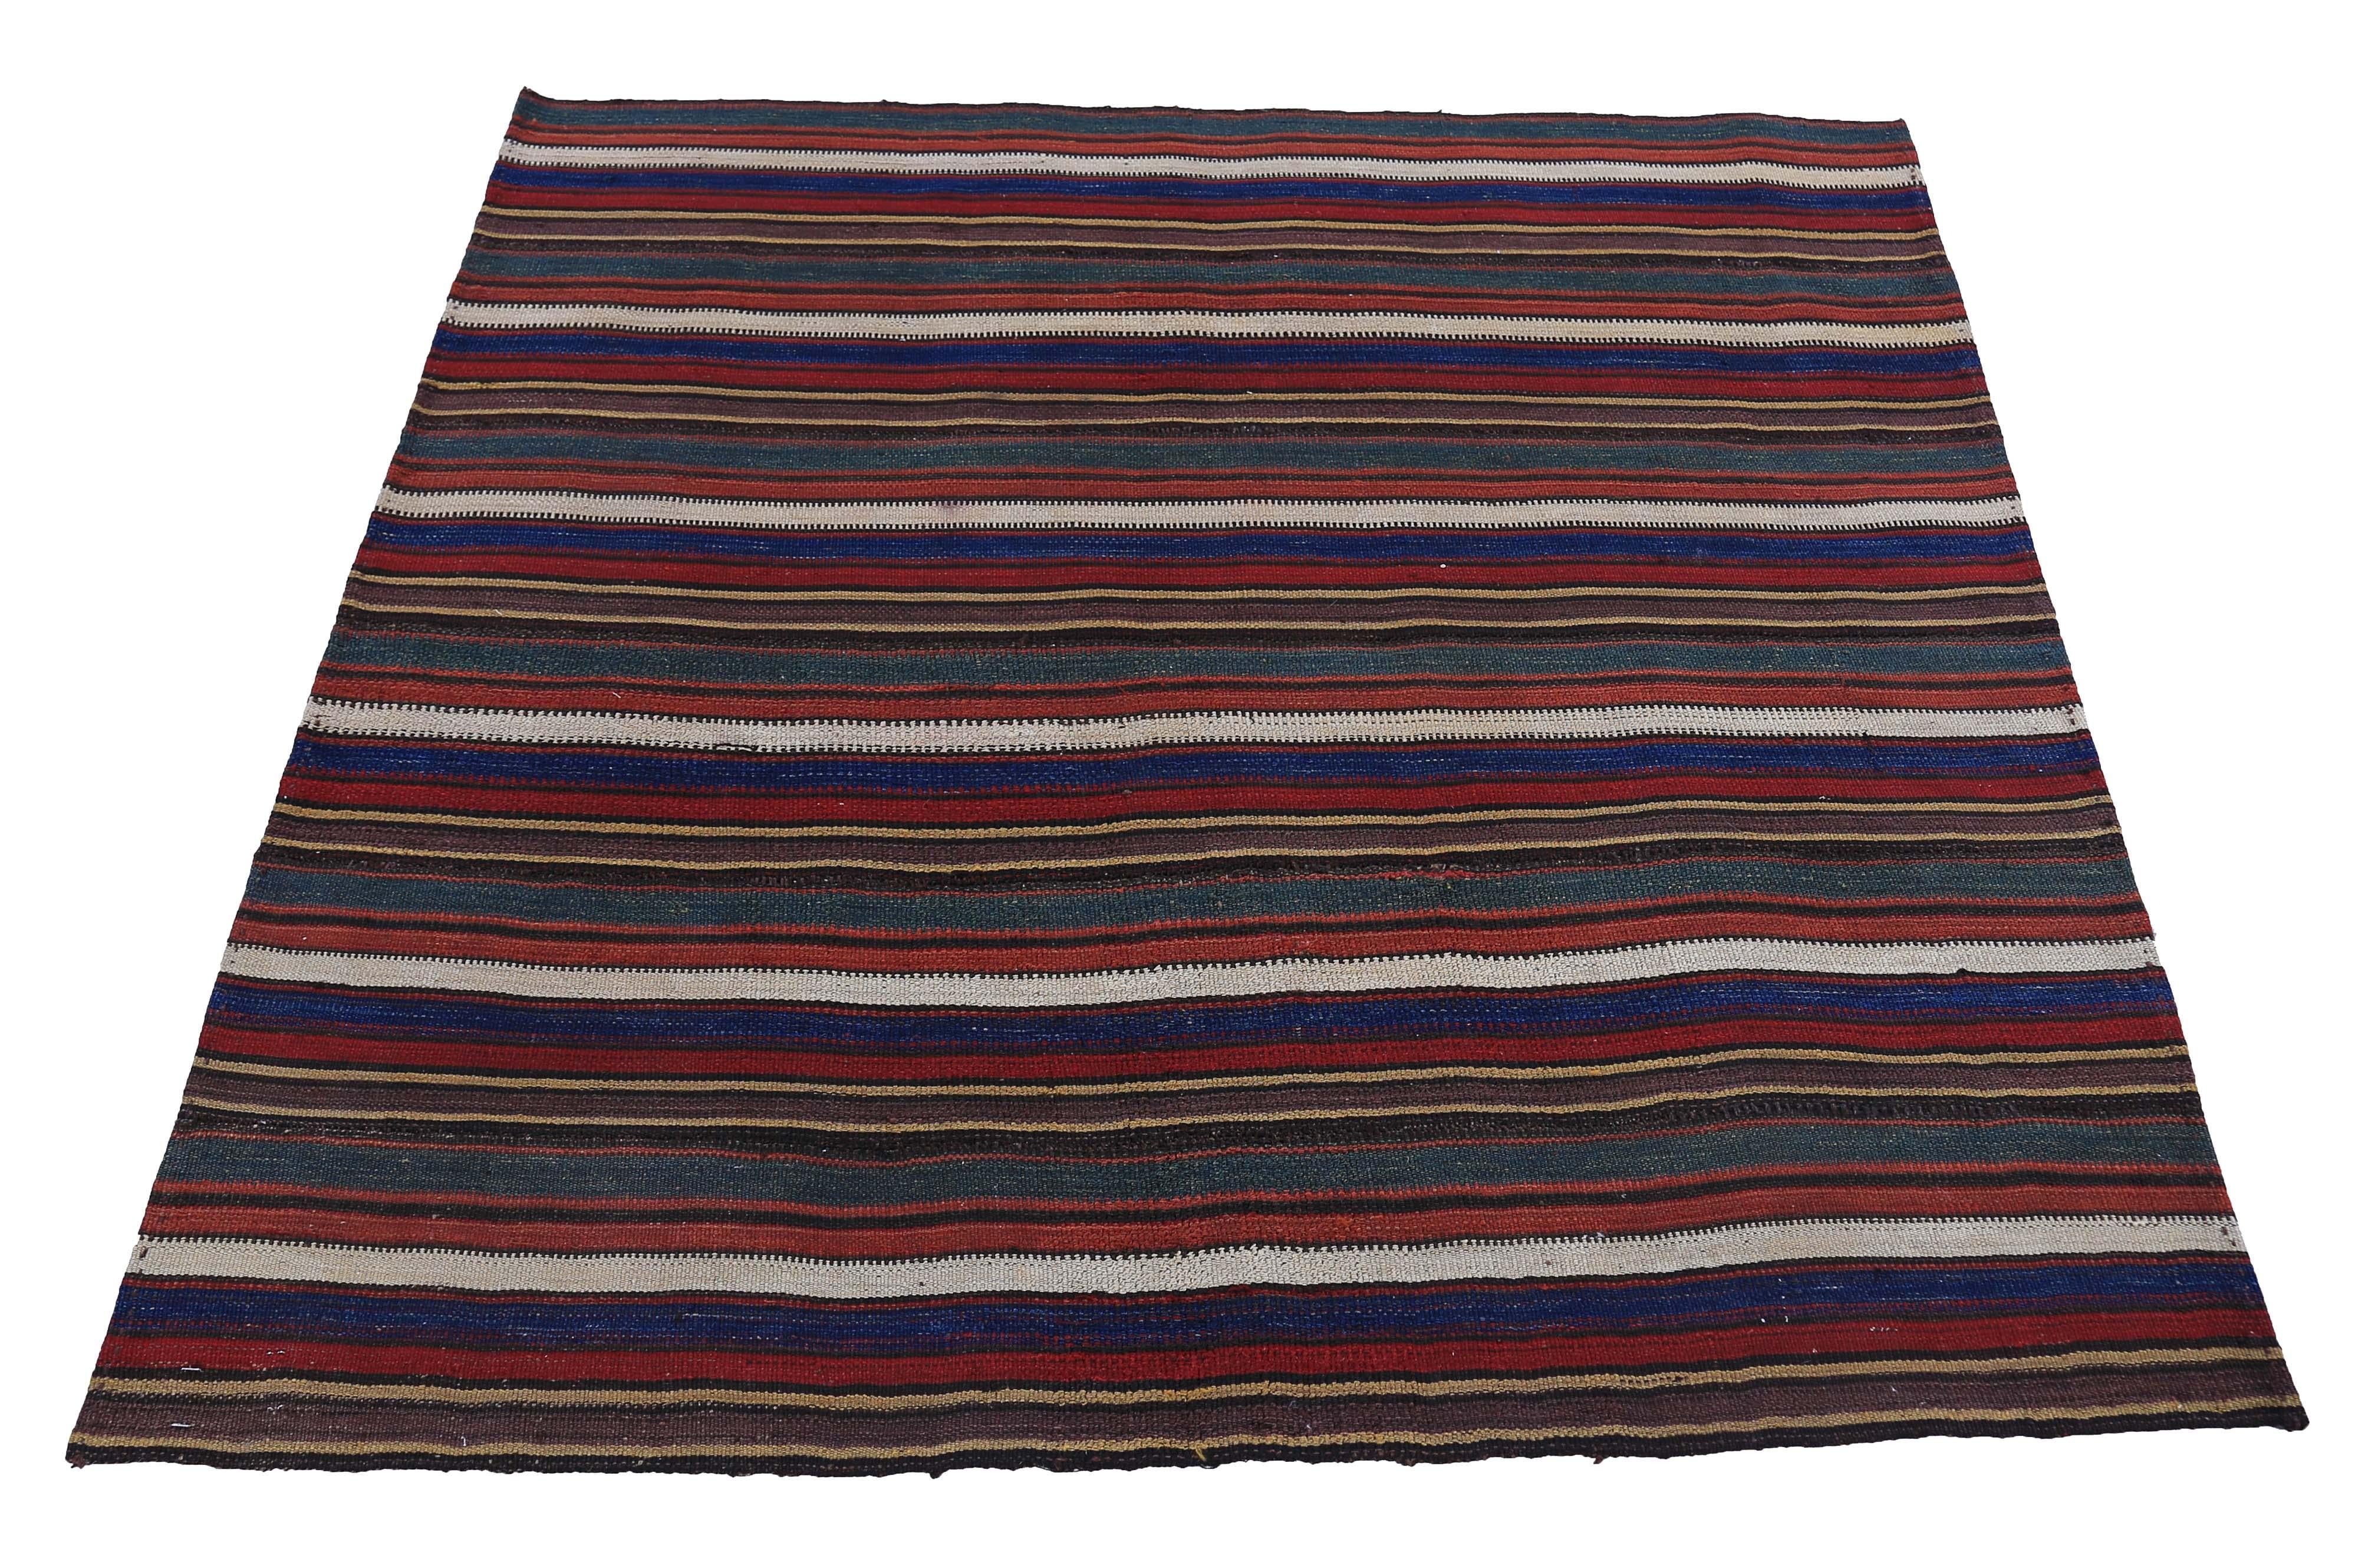 Modern Turkish rug handwoven from the finest sheep’s wool and colored with all-natural vegetable dyes that are safe for humans and pets. It’s a traditional Kilim flat-weave design featuring red, blue and beige stripes. It’s a stunning piece to get